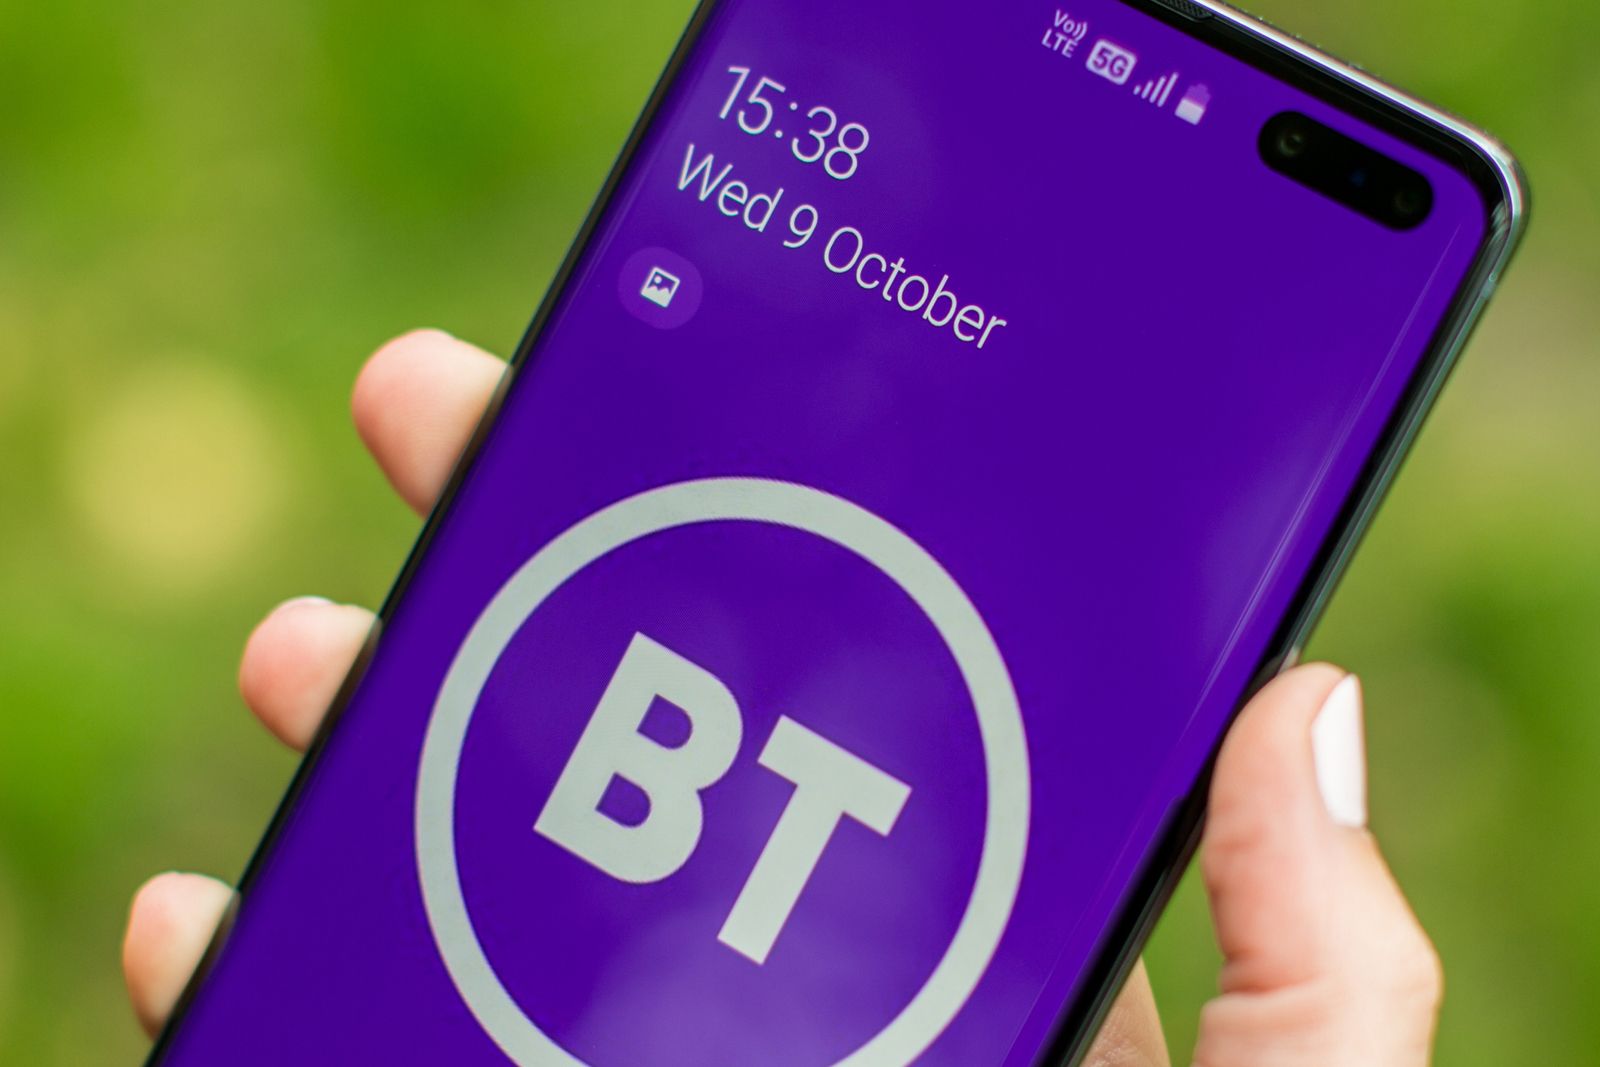 BT opens up 5G to all customers image 1